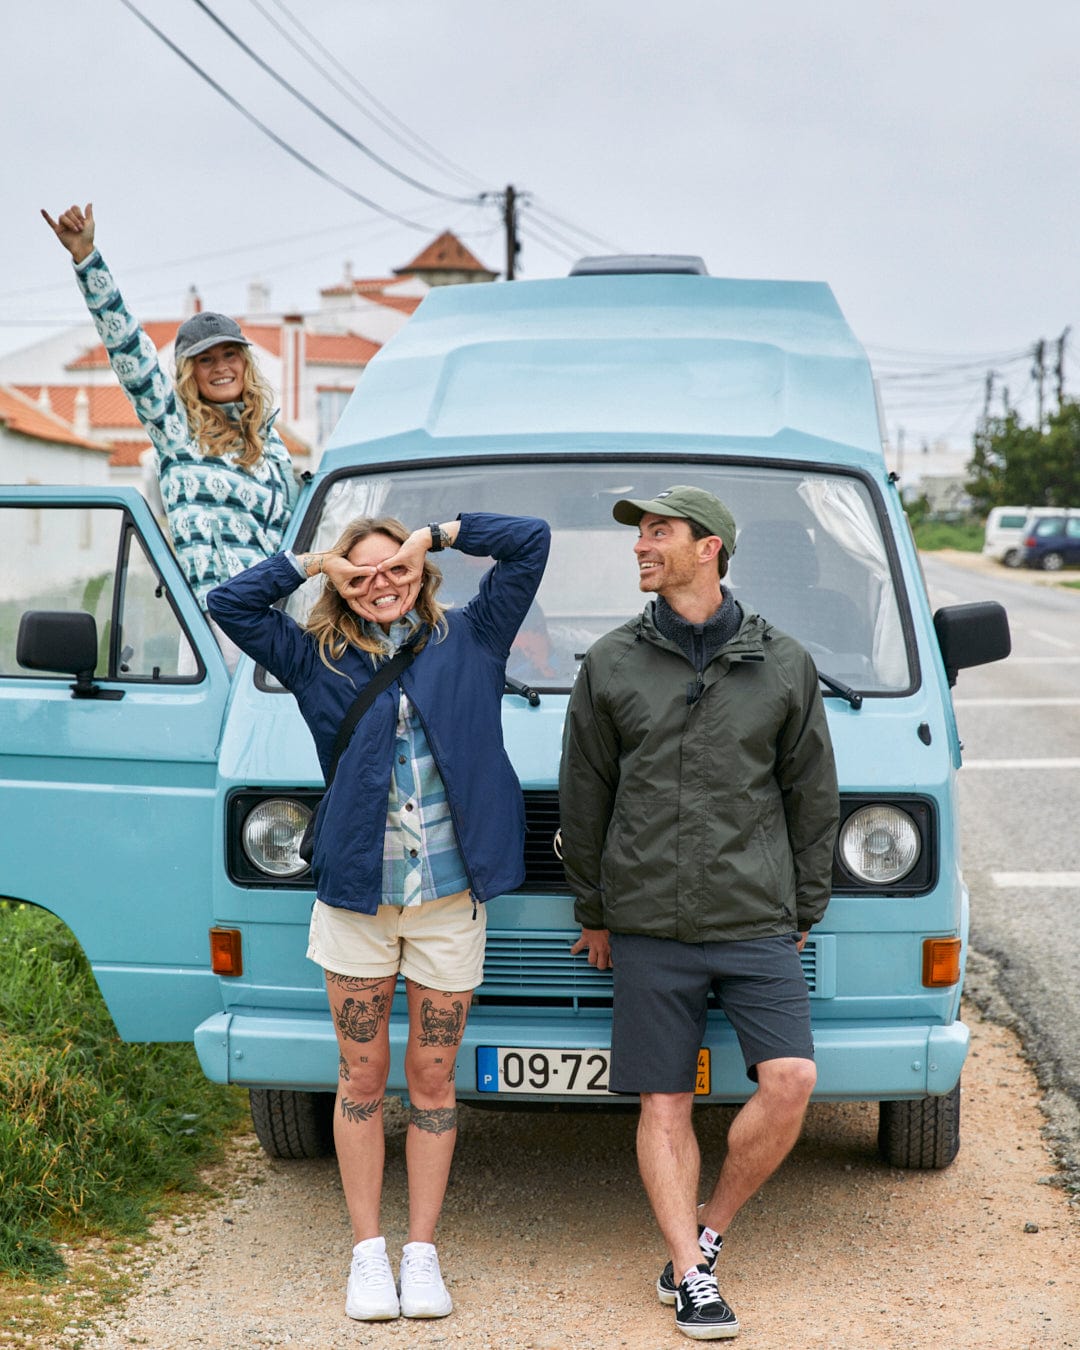 Three friends posing joyfully in front of a light blue vintage van on a cloudy day; two women and one man, with the man wearing a Saltrock Rainier - Mens Packable Waterproof Jacket in Green.